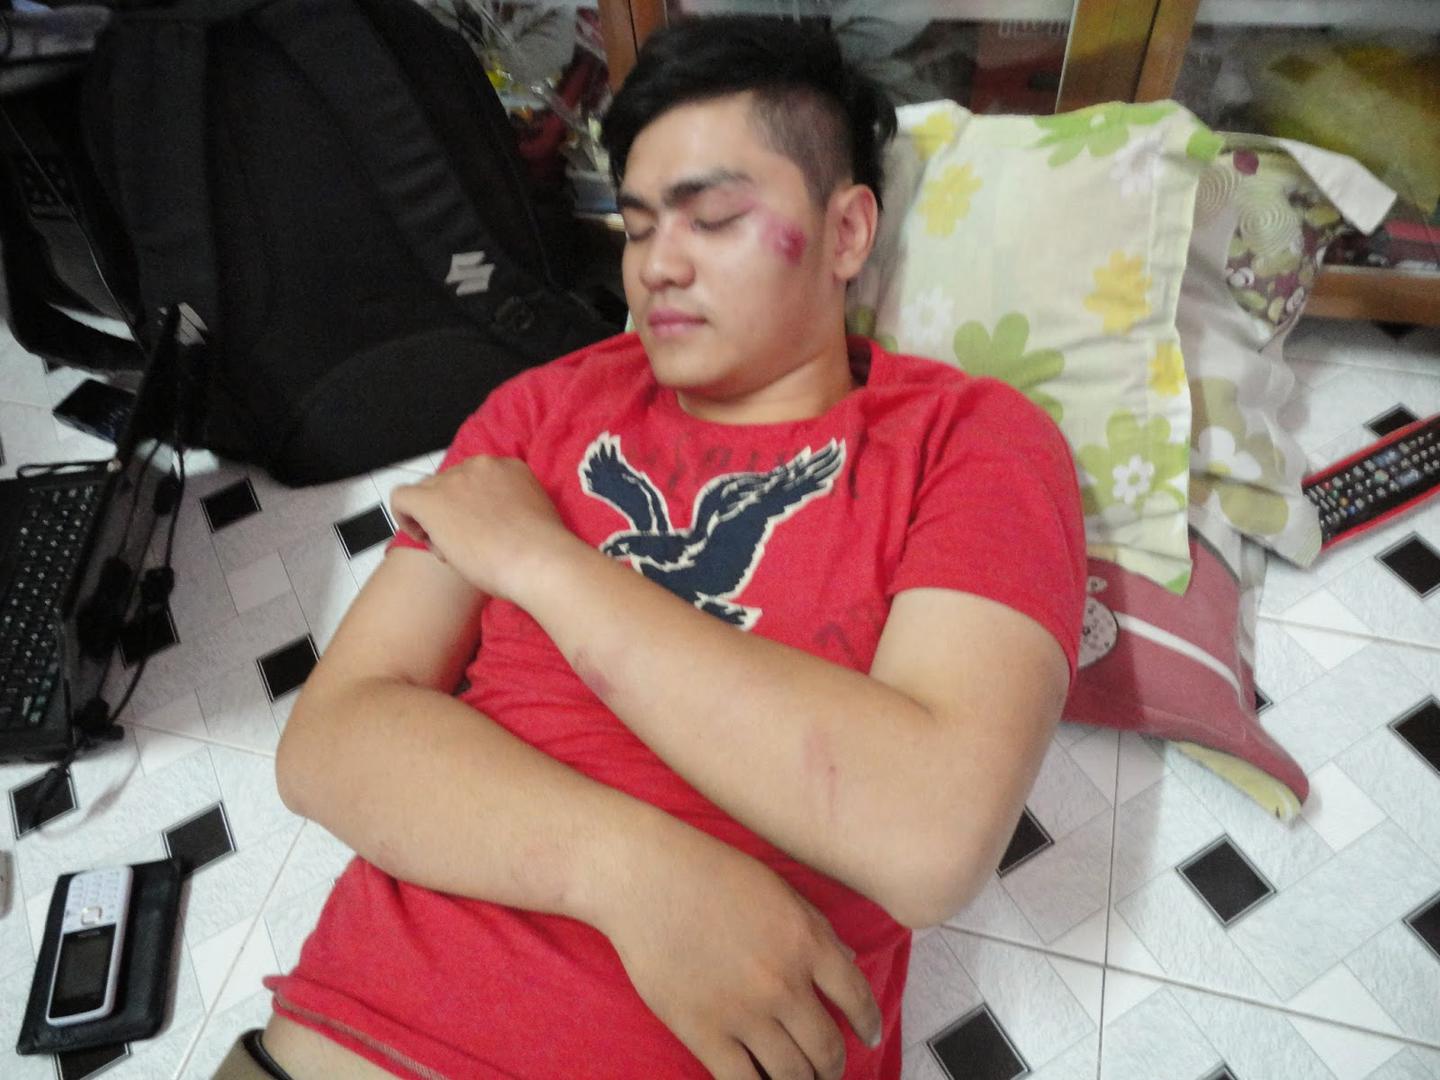 Nguyen Quang Trieu after being assaulted in Binh Duong on March 25, 2015.